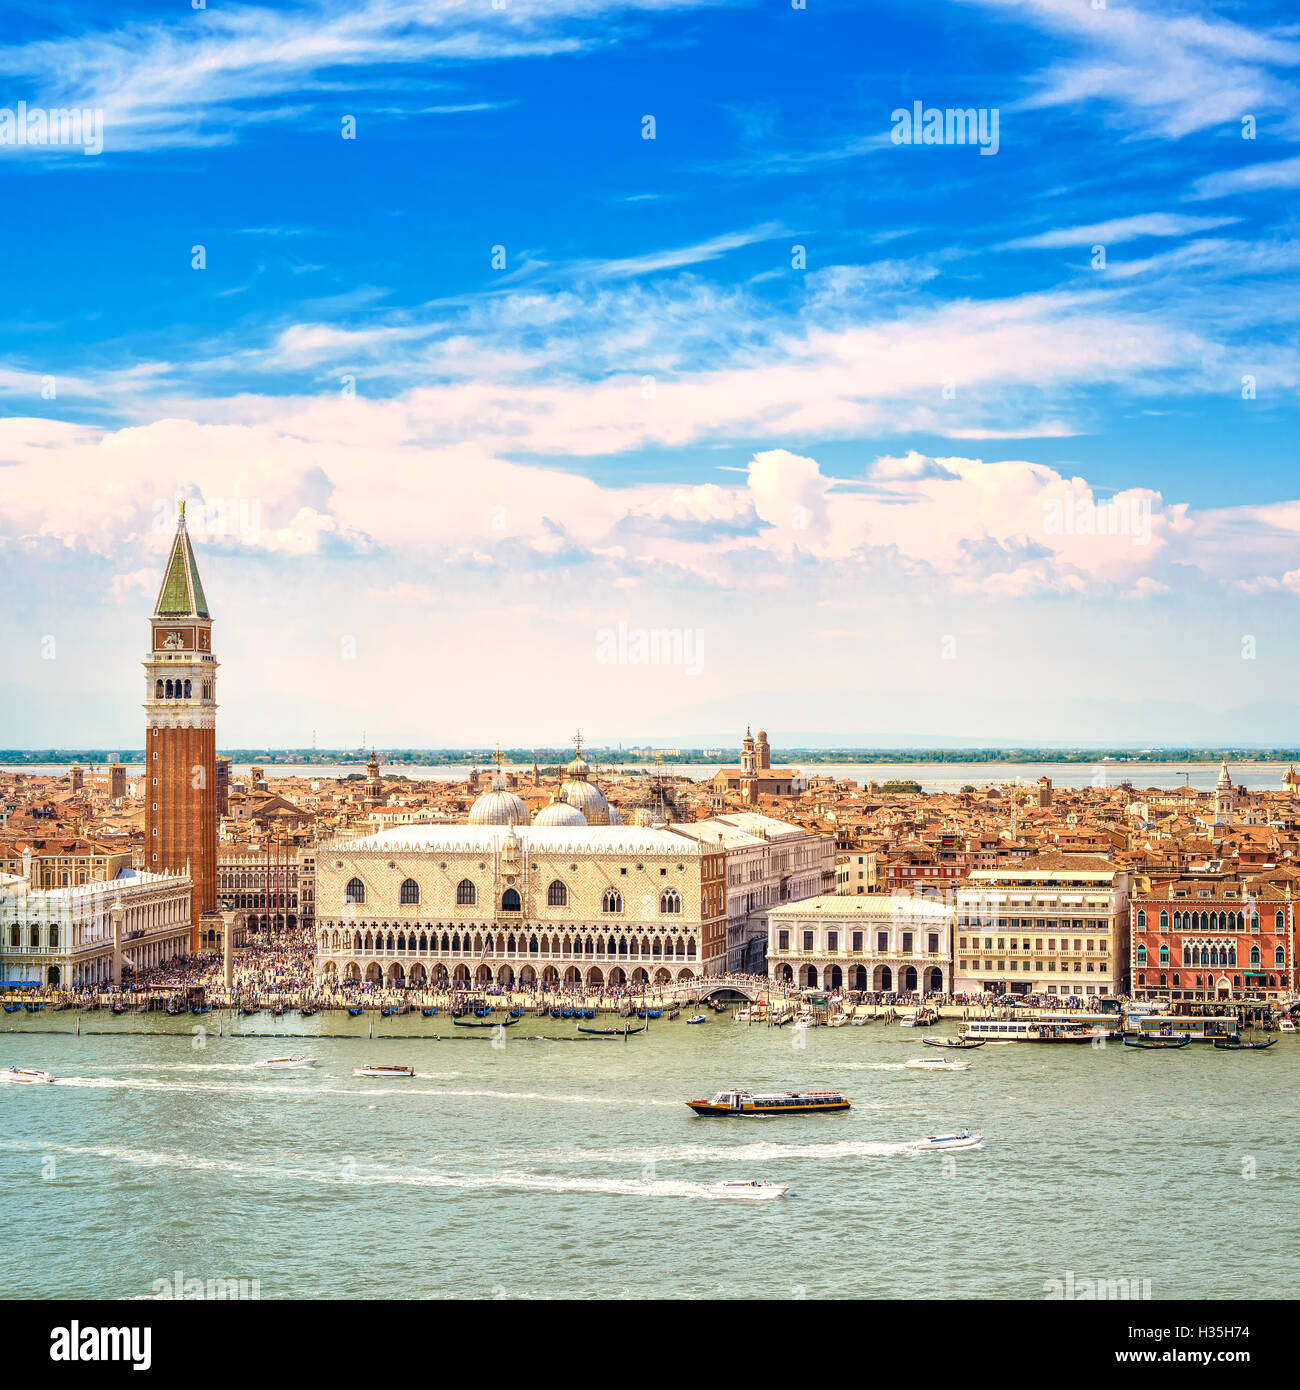 Venice landmark, aerial view of Piazza San Marco or st Mark square, Campanile and Ducale or Doge Palace. Italy, Europe. Stock Photo